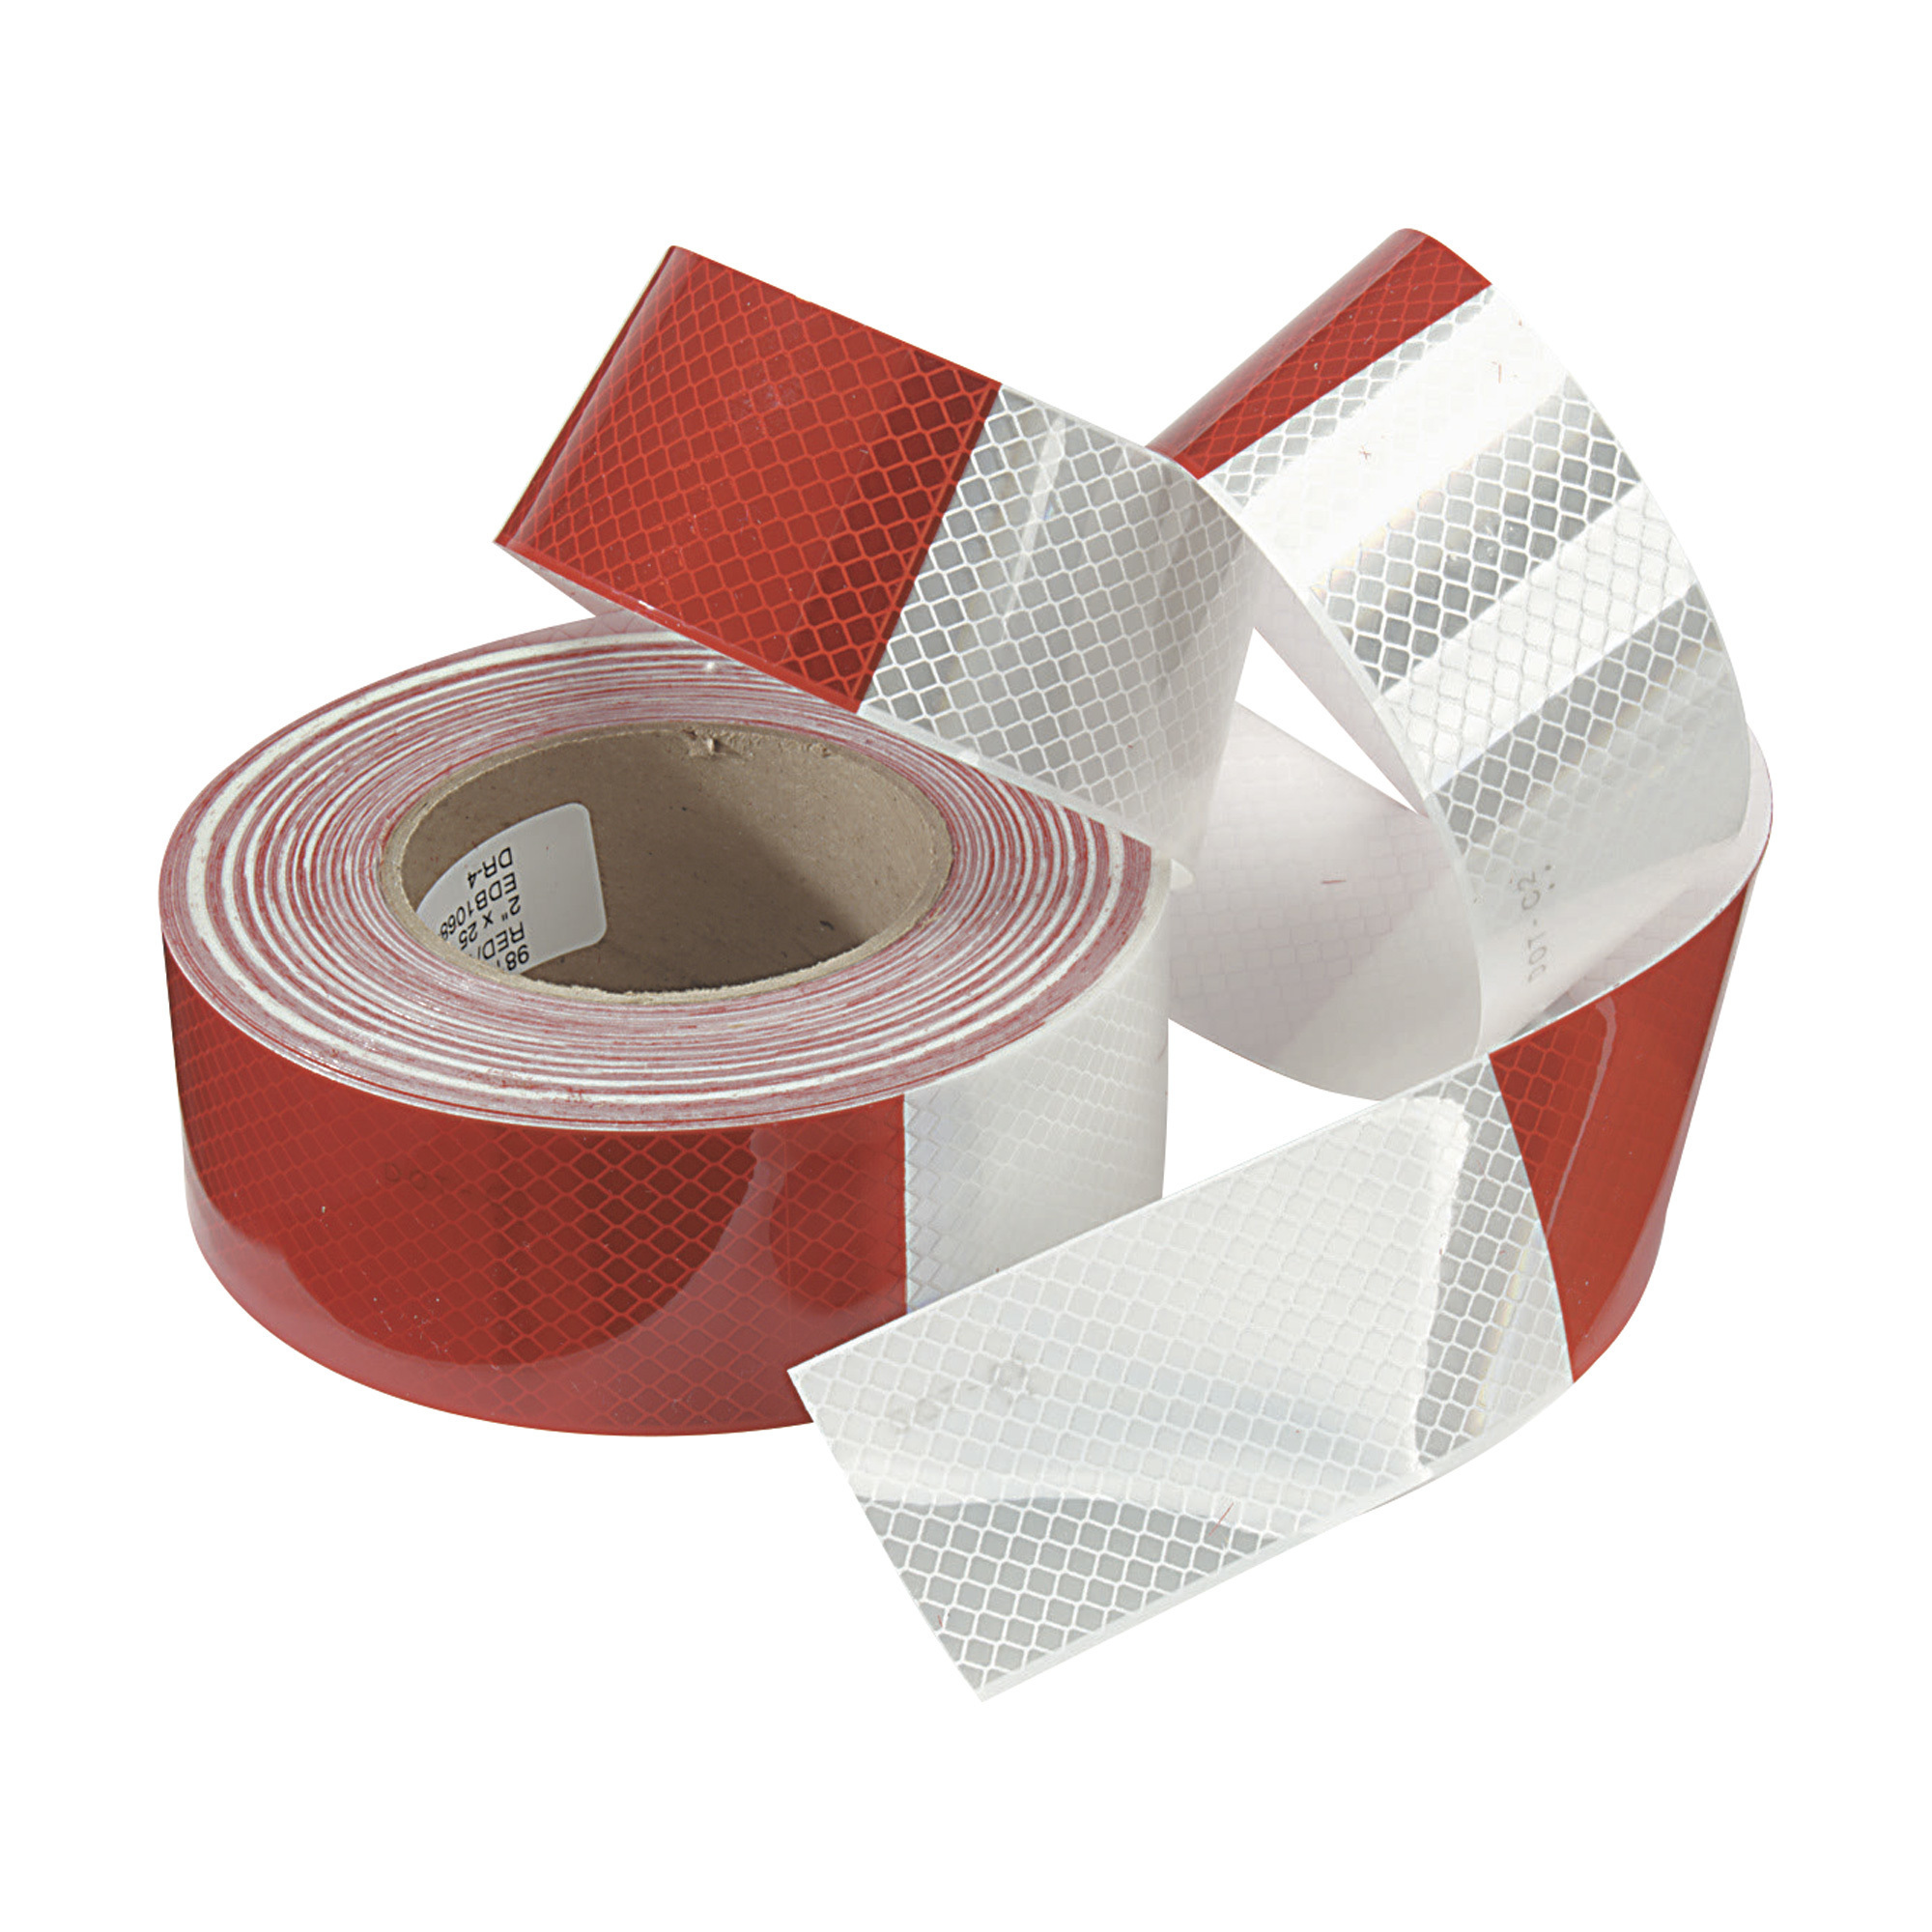 2 BLACK Engineer Grade Reflective Tape - 3 Types - Bright, Brighter, –  Tape Finder Online Store - Division of Reflective Inc.